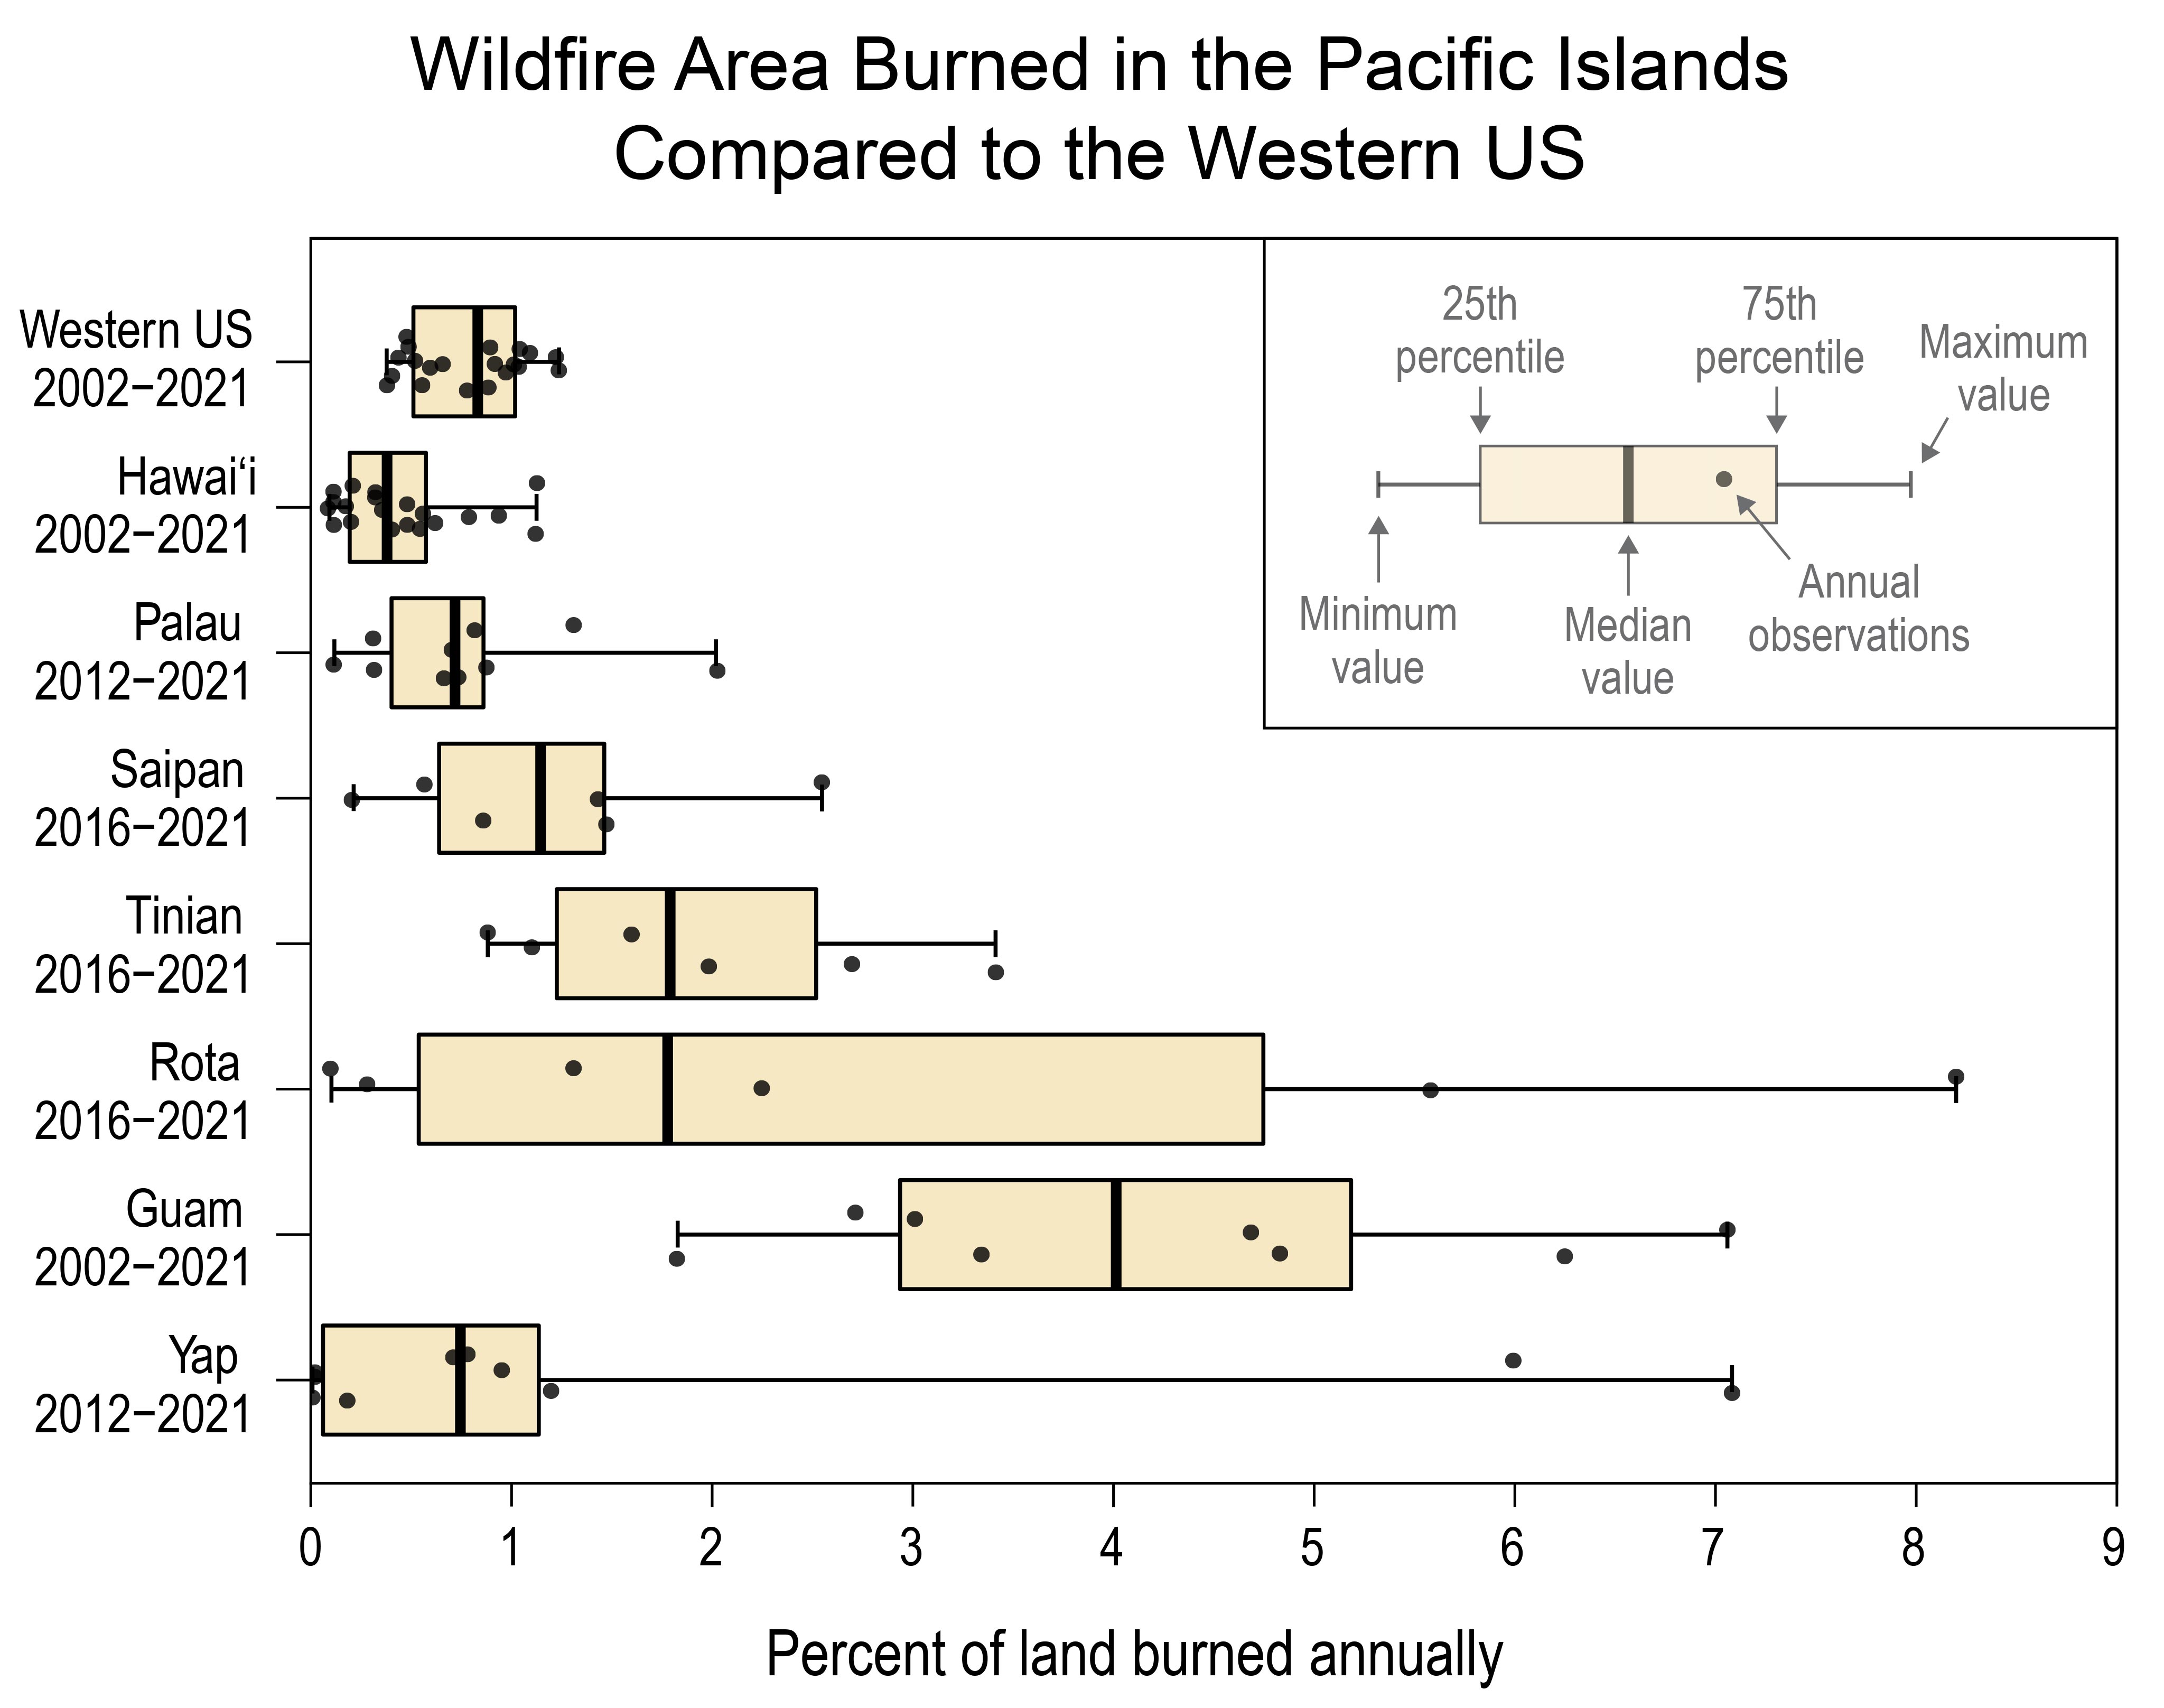 Wildfire Area Burned in the Pacific Islands Compared to the Western US